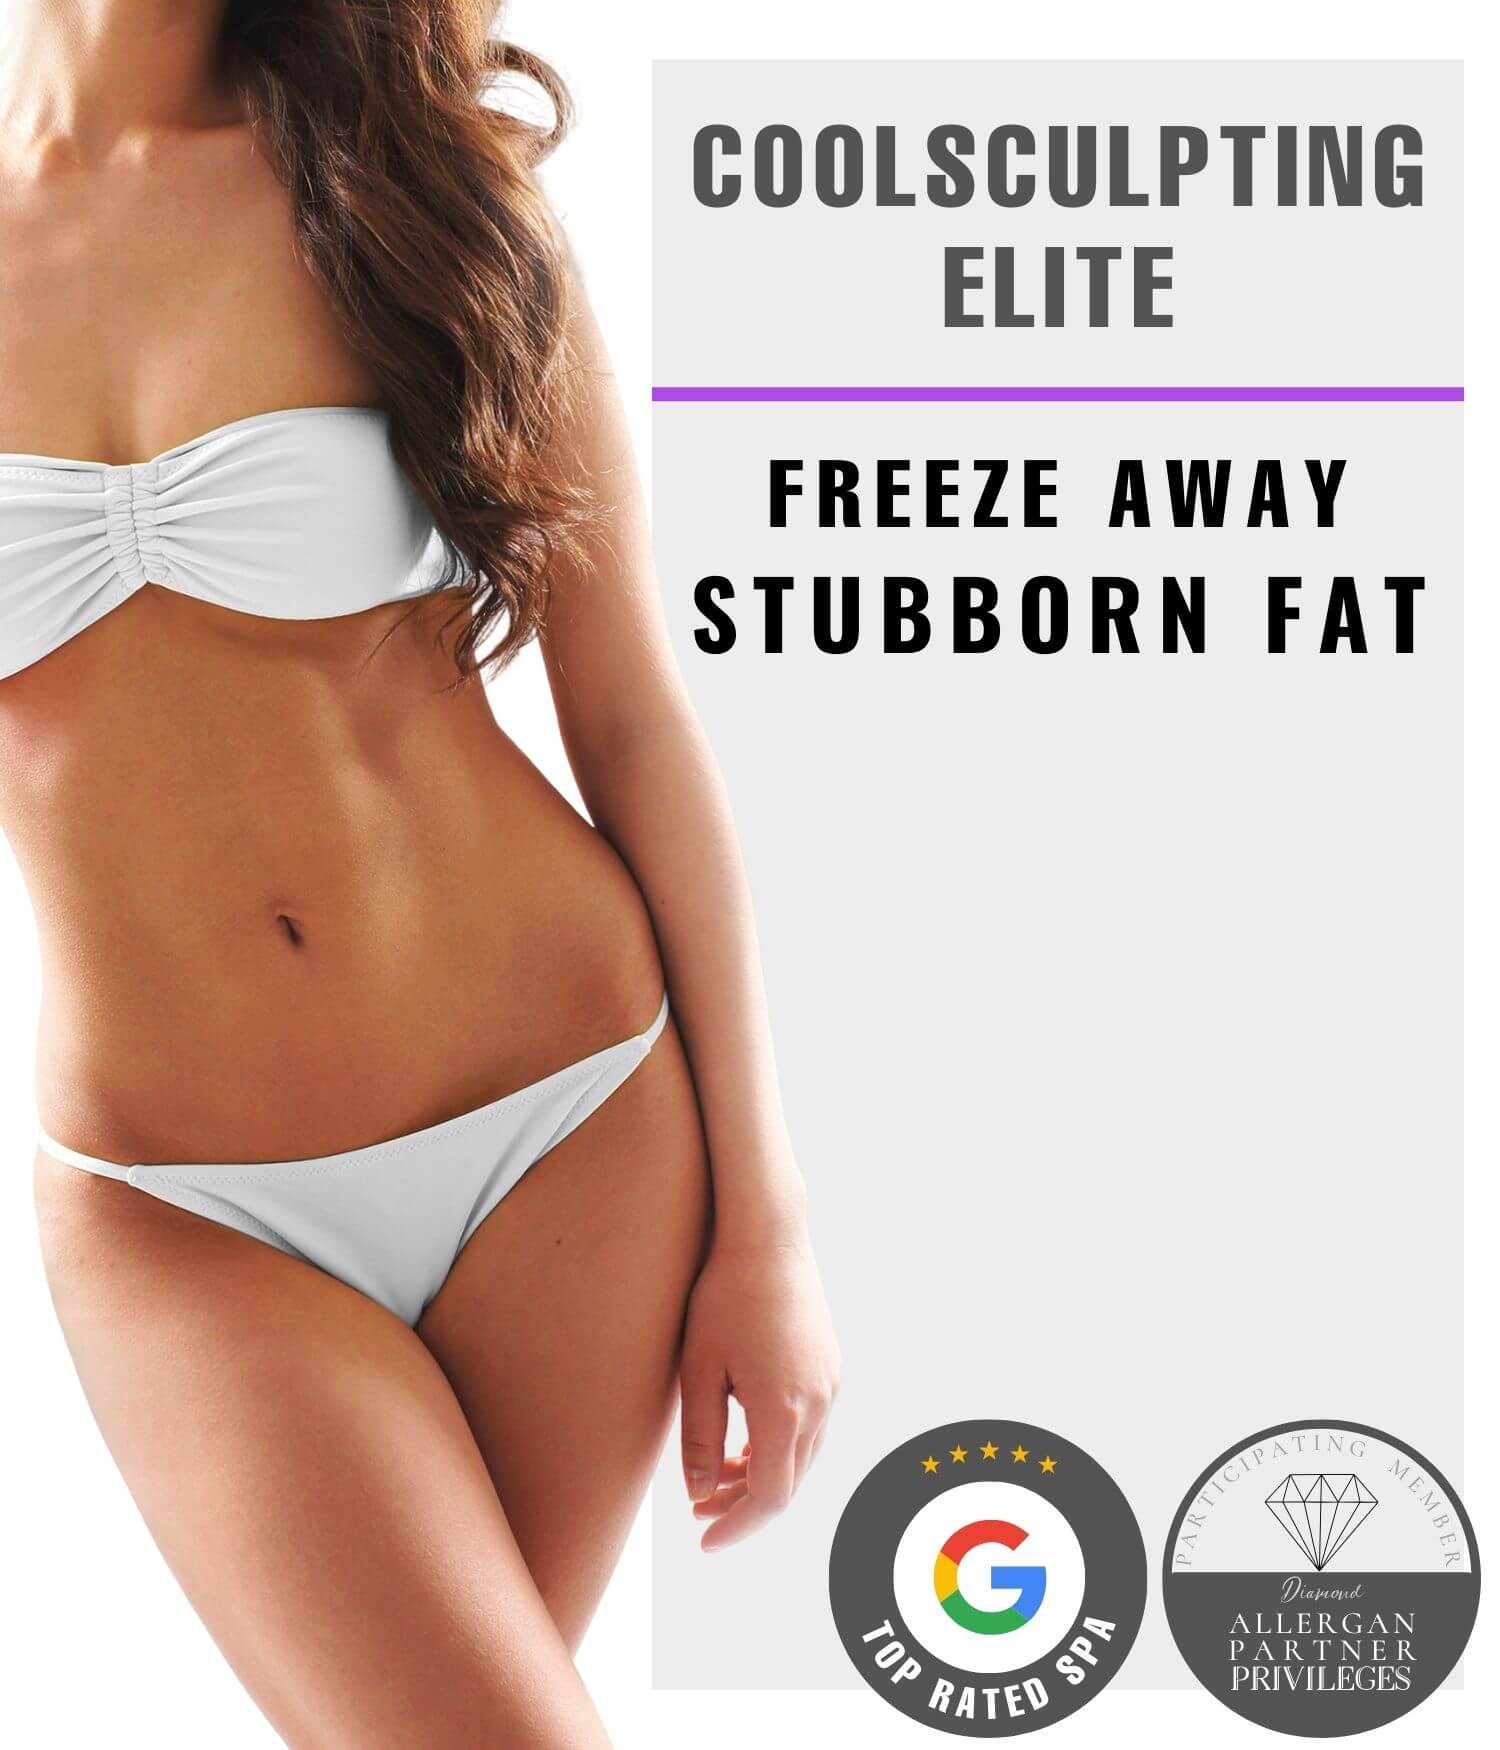 Portrait of a woman with a sculpted body promoting CoolSculpting Elite treatment in Fort Worth, TX